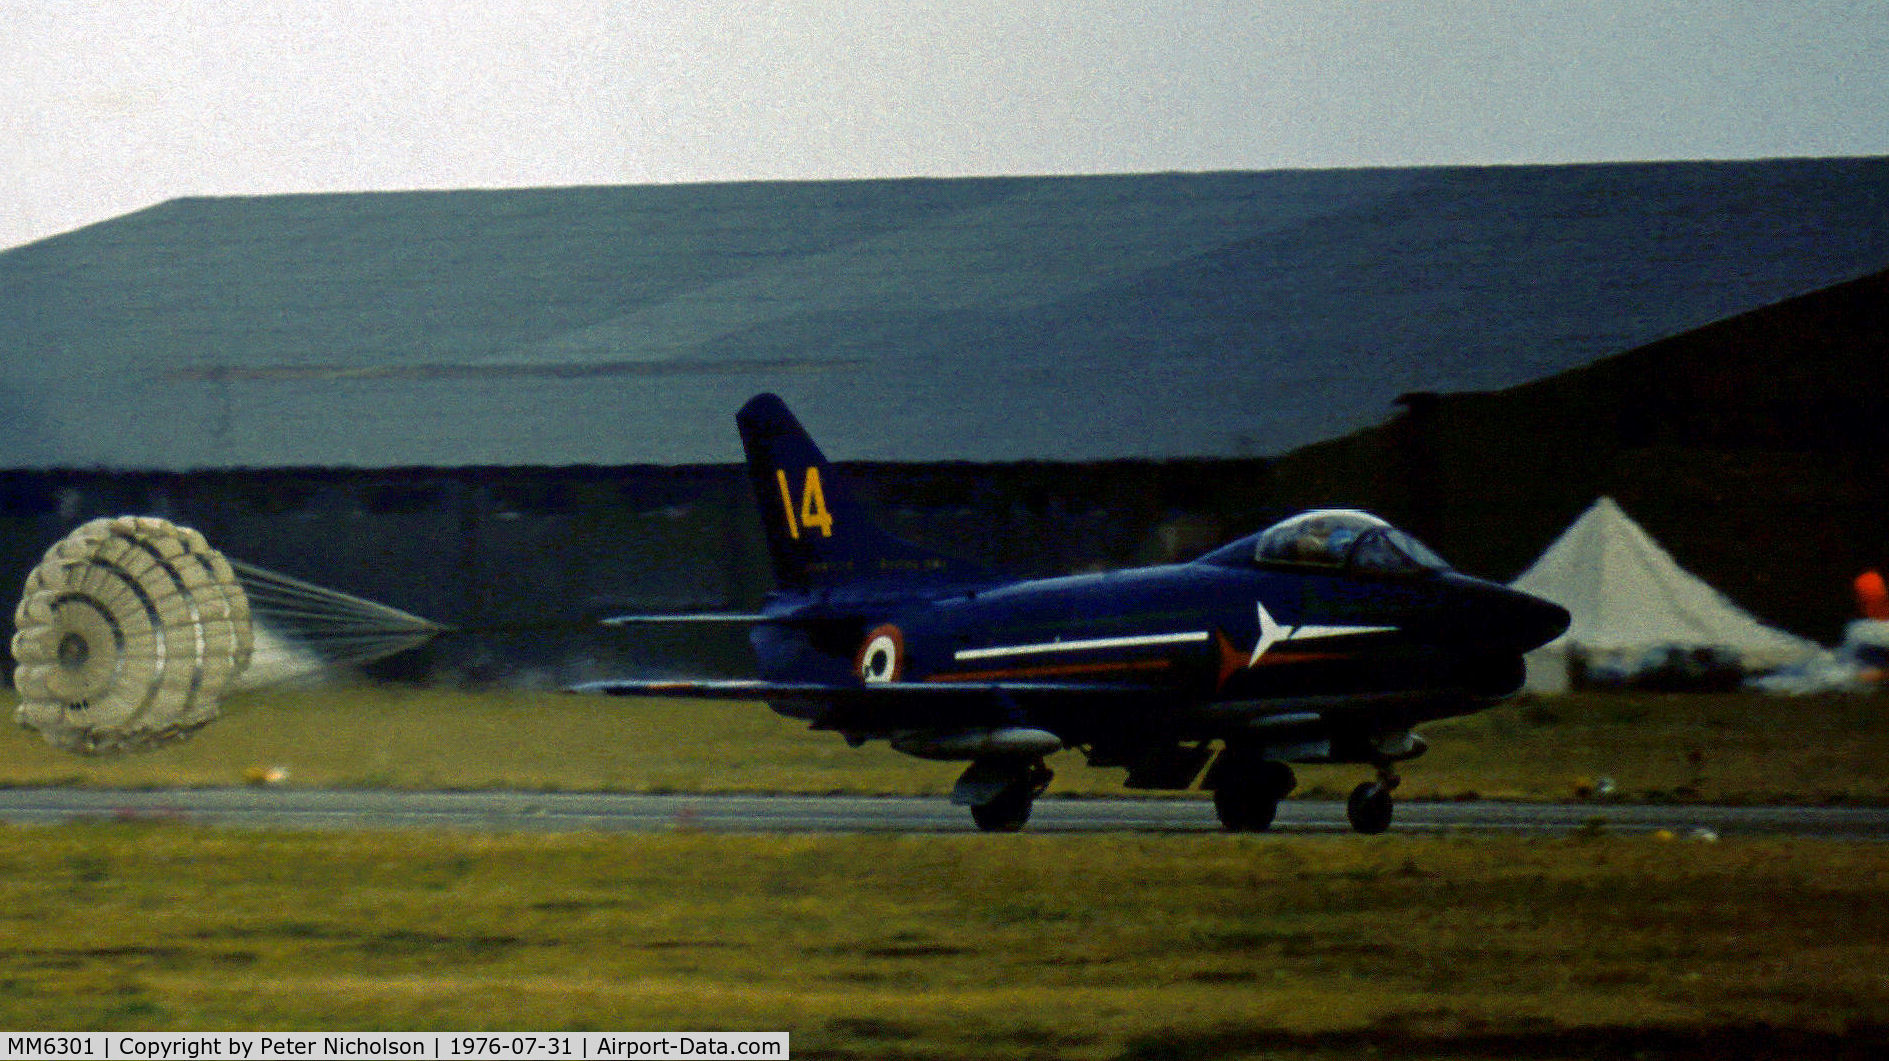 MM6301, Fiat G-91PAN C/N 165, G-91PAN number 14 of the Italian Air Force's Frecce Tricolori demonstration team in action at the 1976 Intnl Air Tattoo at RAF Greenham Common.